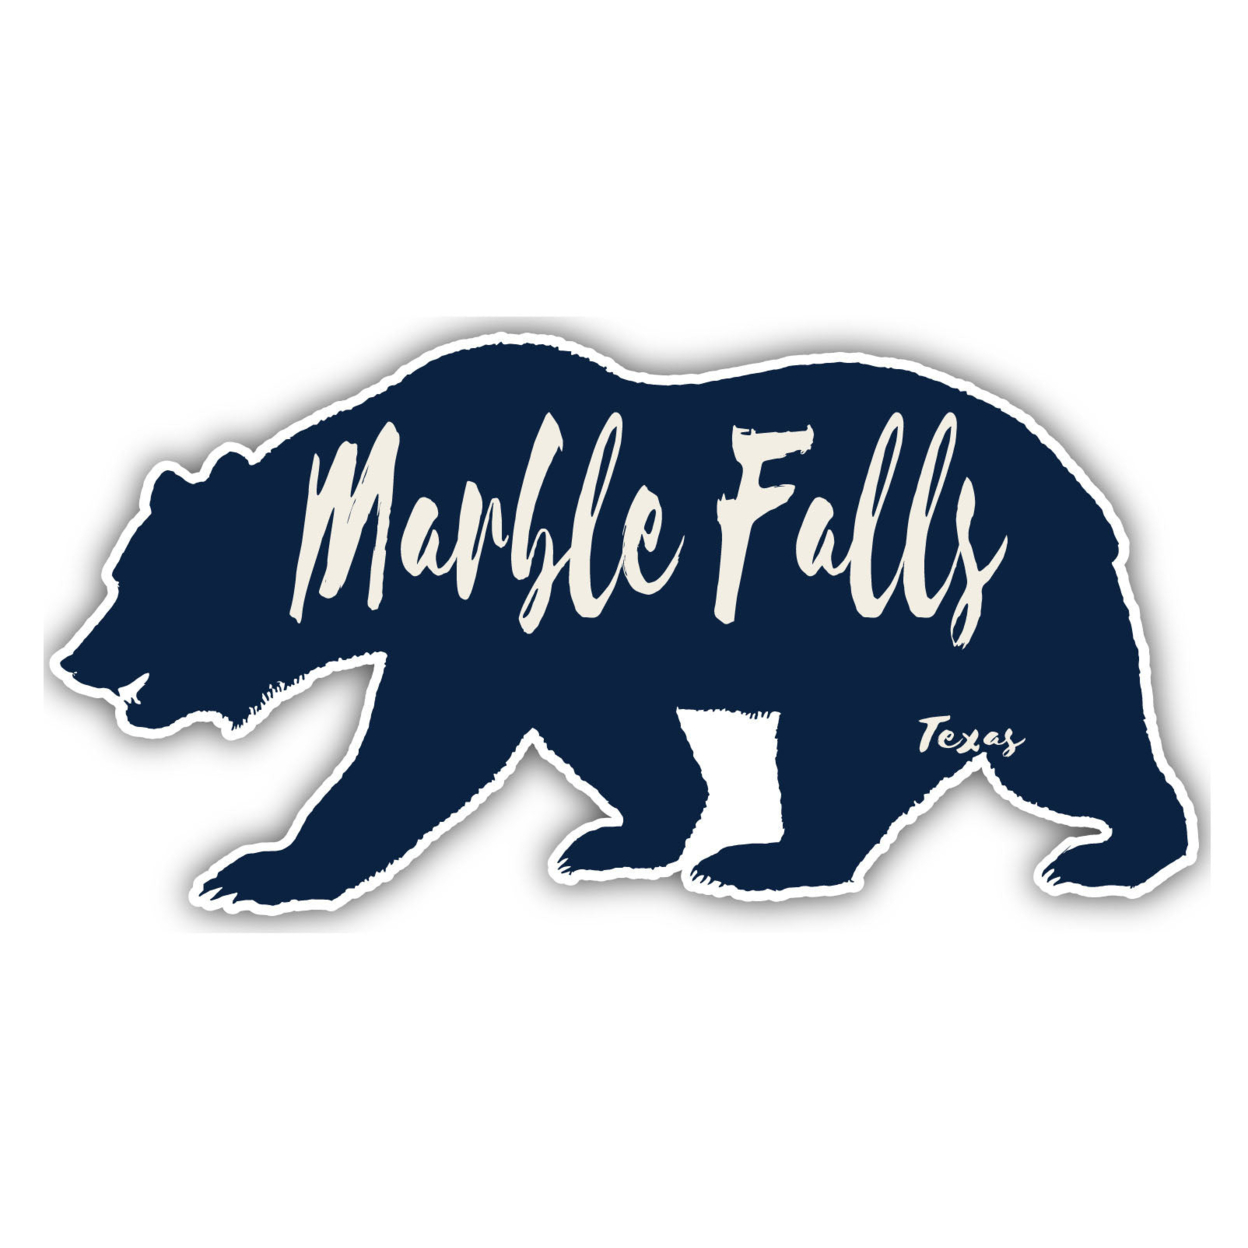 Marble Falls Texas Souvenir Decorative Stickers (Choose Theme And Size) - 2-Inch, Tent